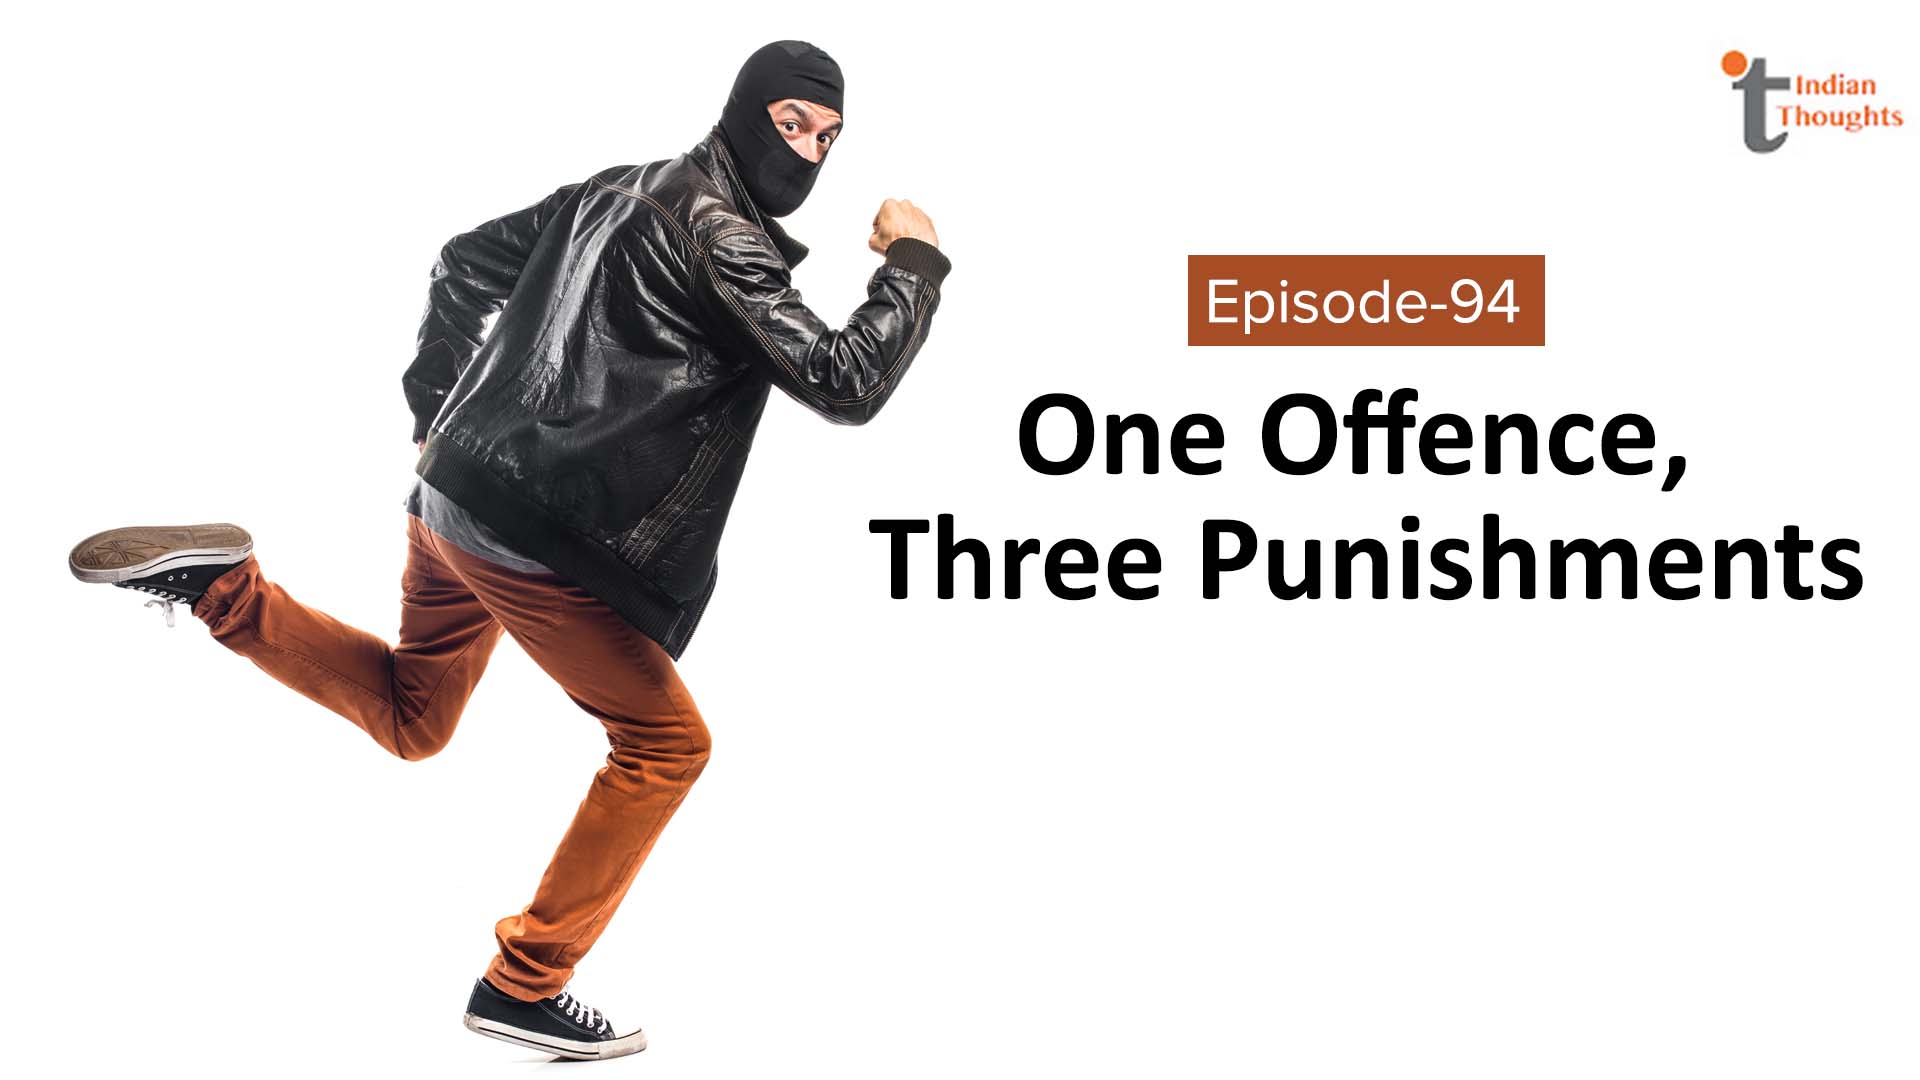 One offence, three punishments